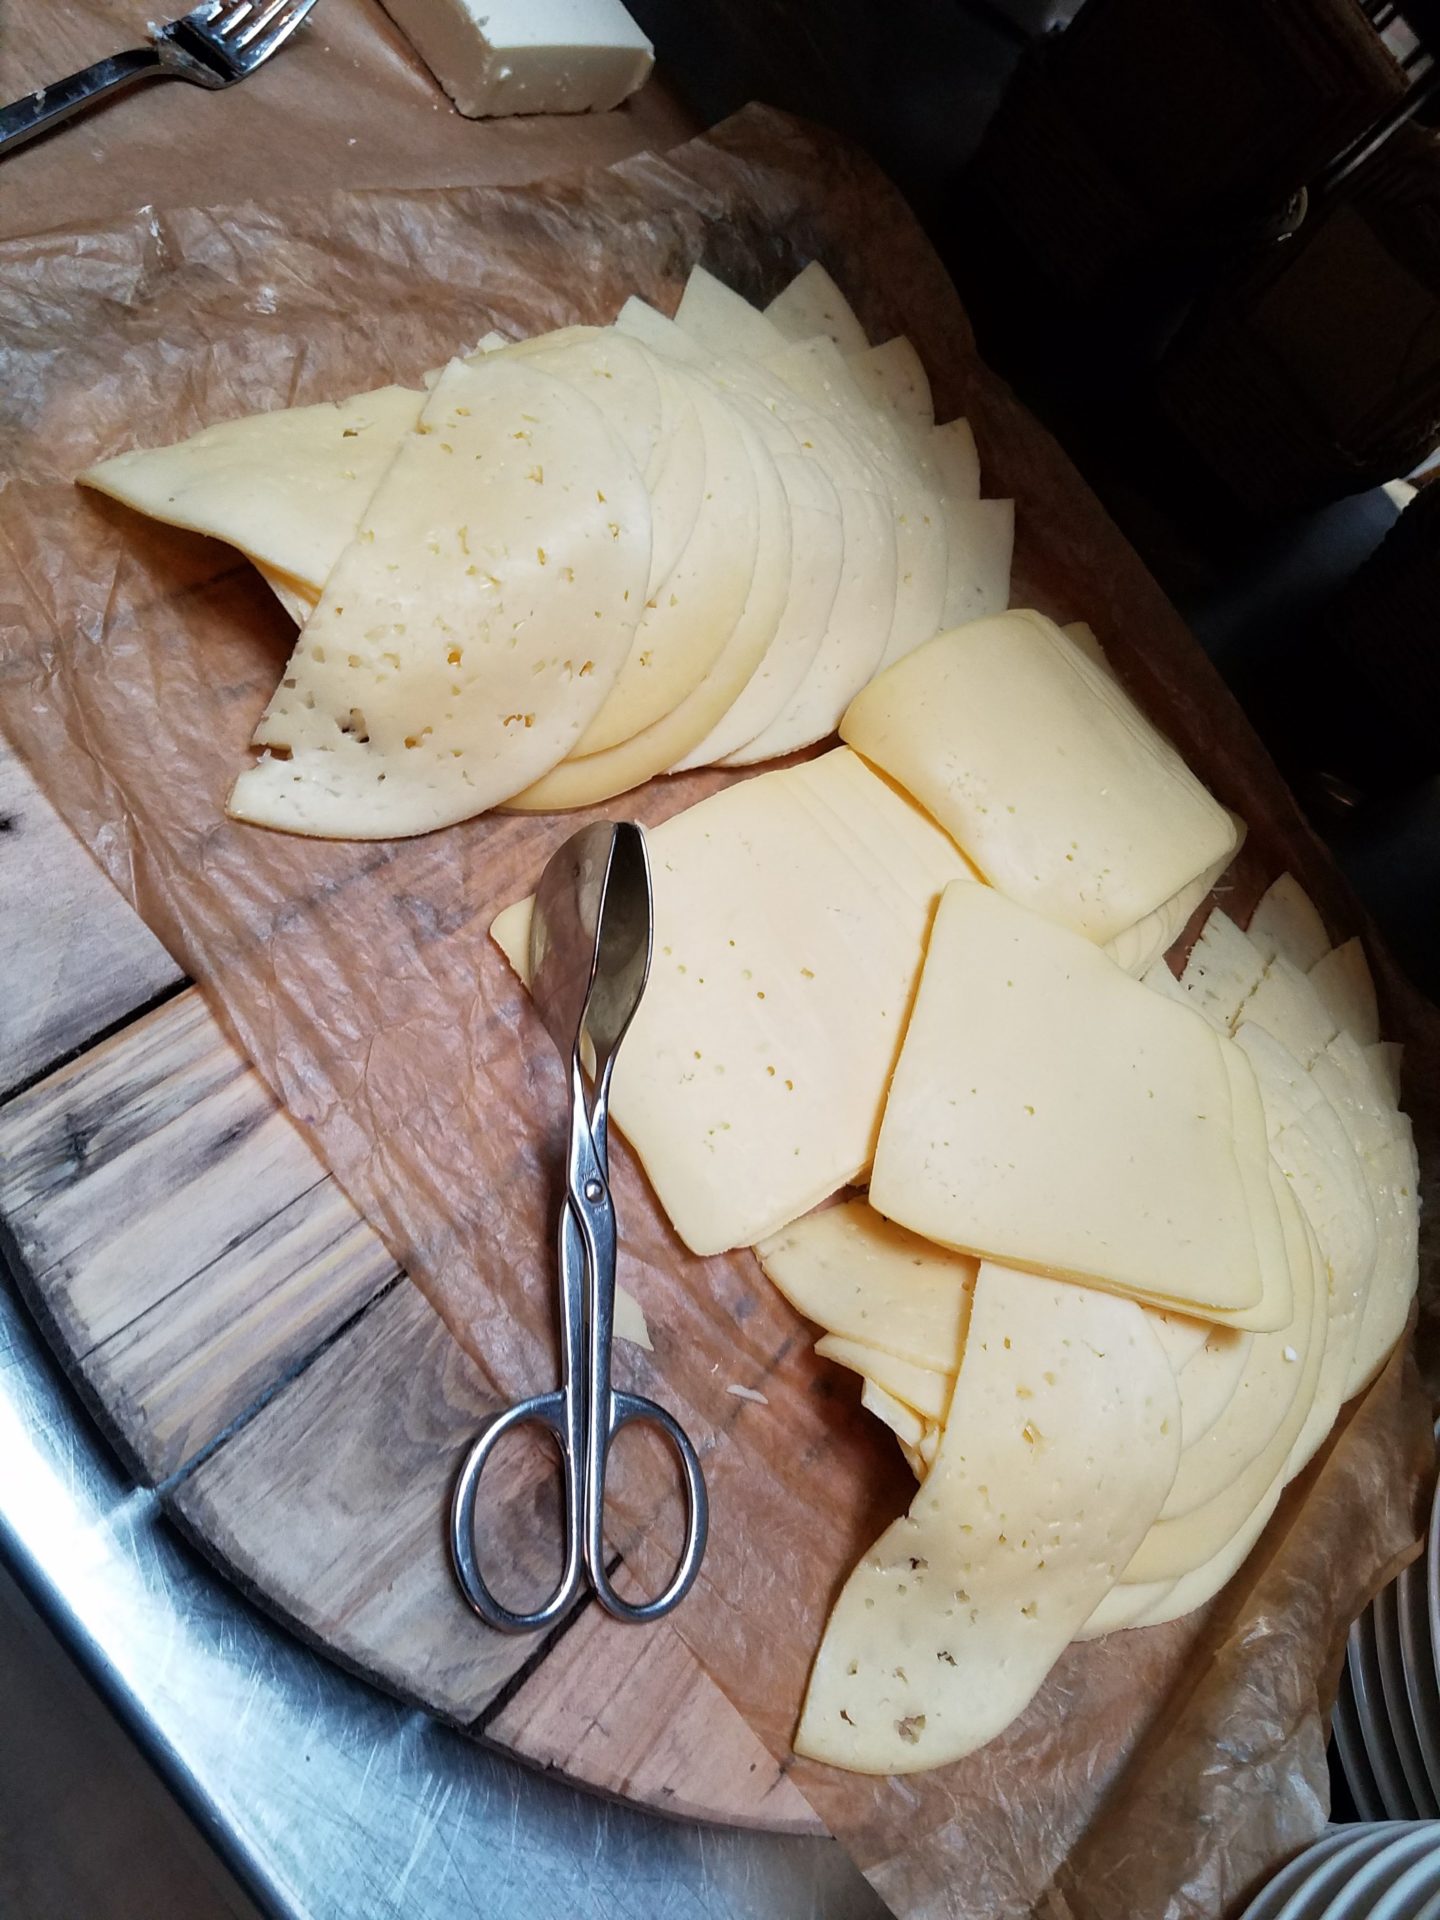 a cheese and scissors on a tray